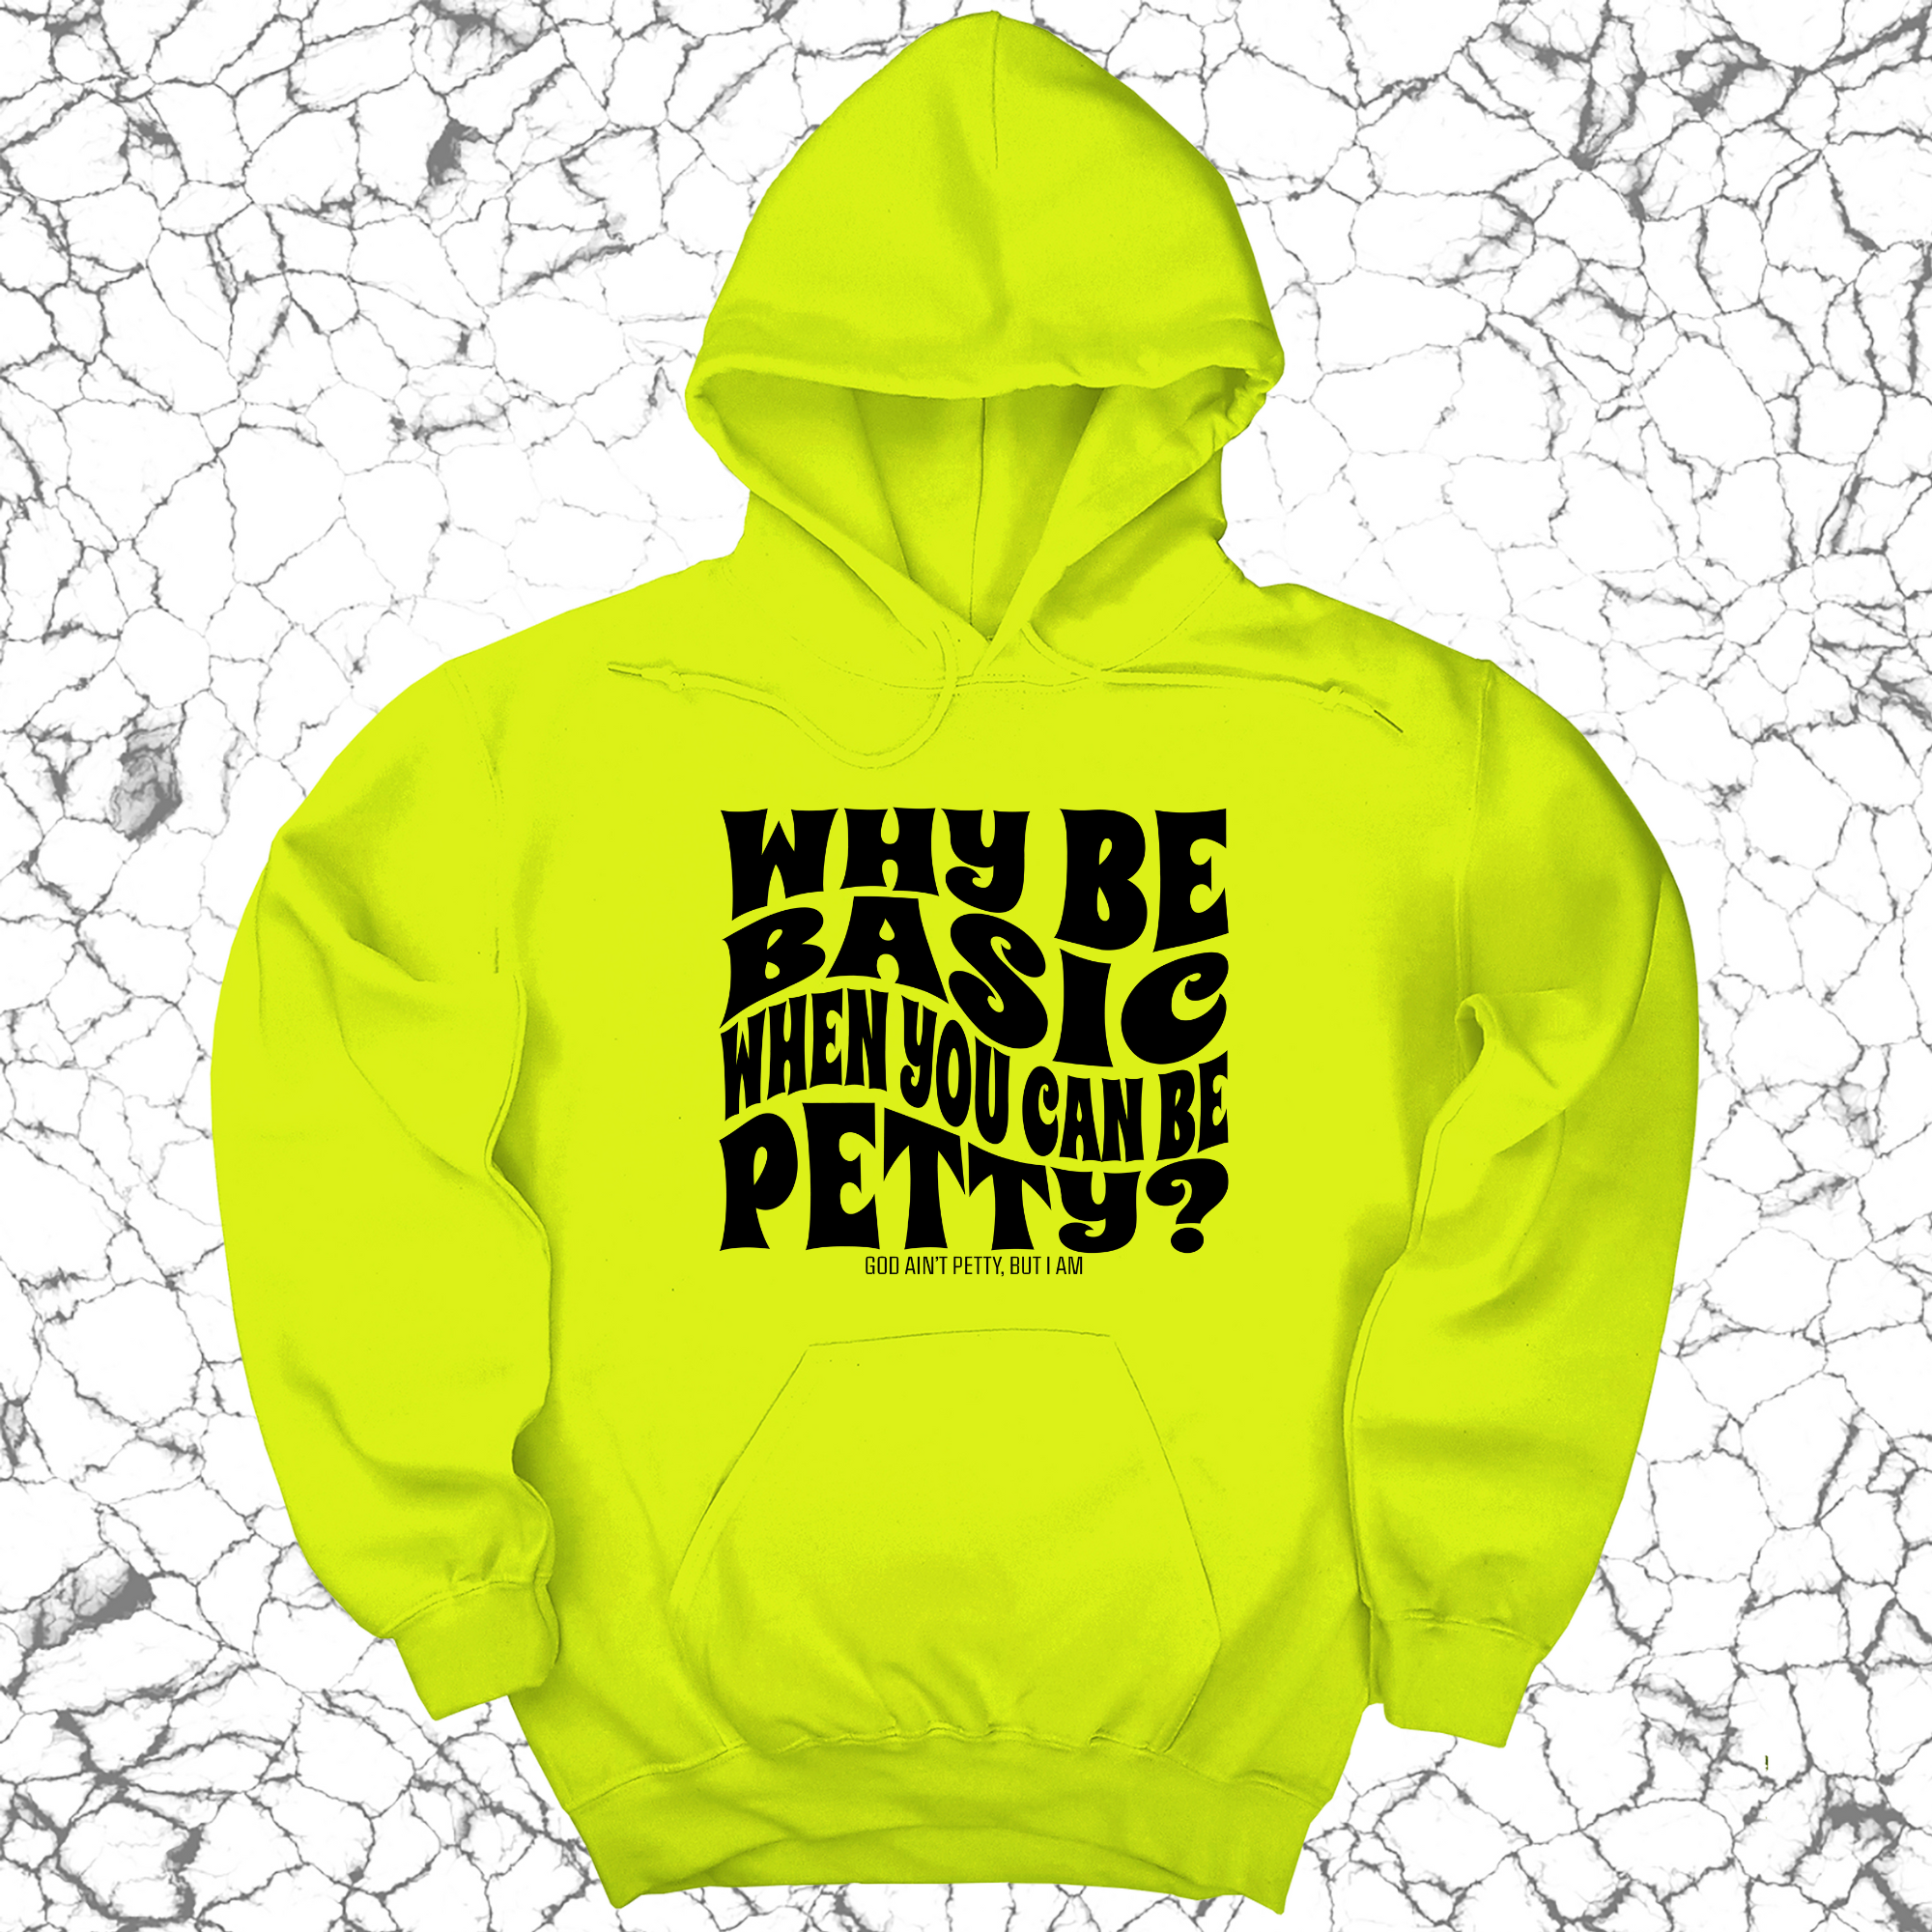 Why be basic when you can be petty Unisex Hoodie-Hoodie-The Original God Ain't Petty But I Am